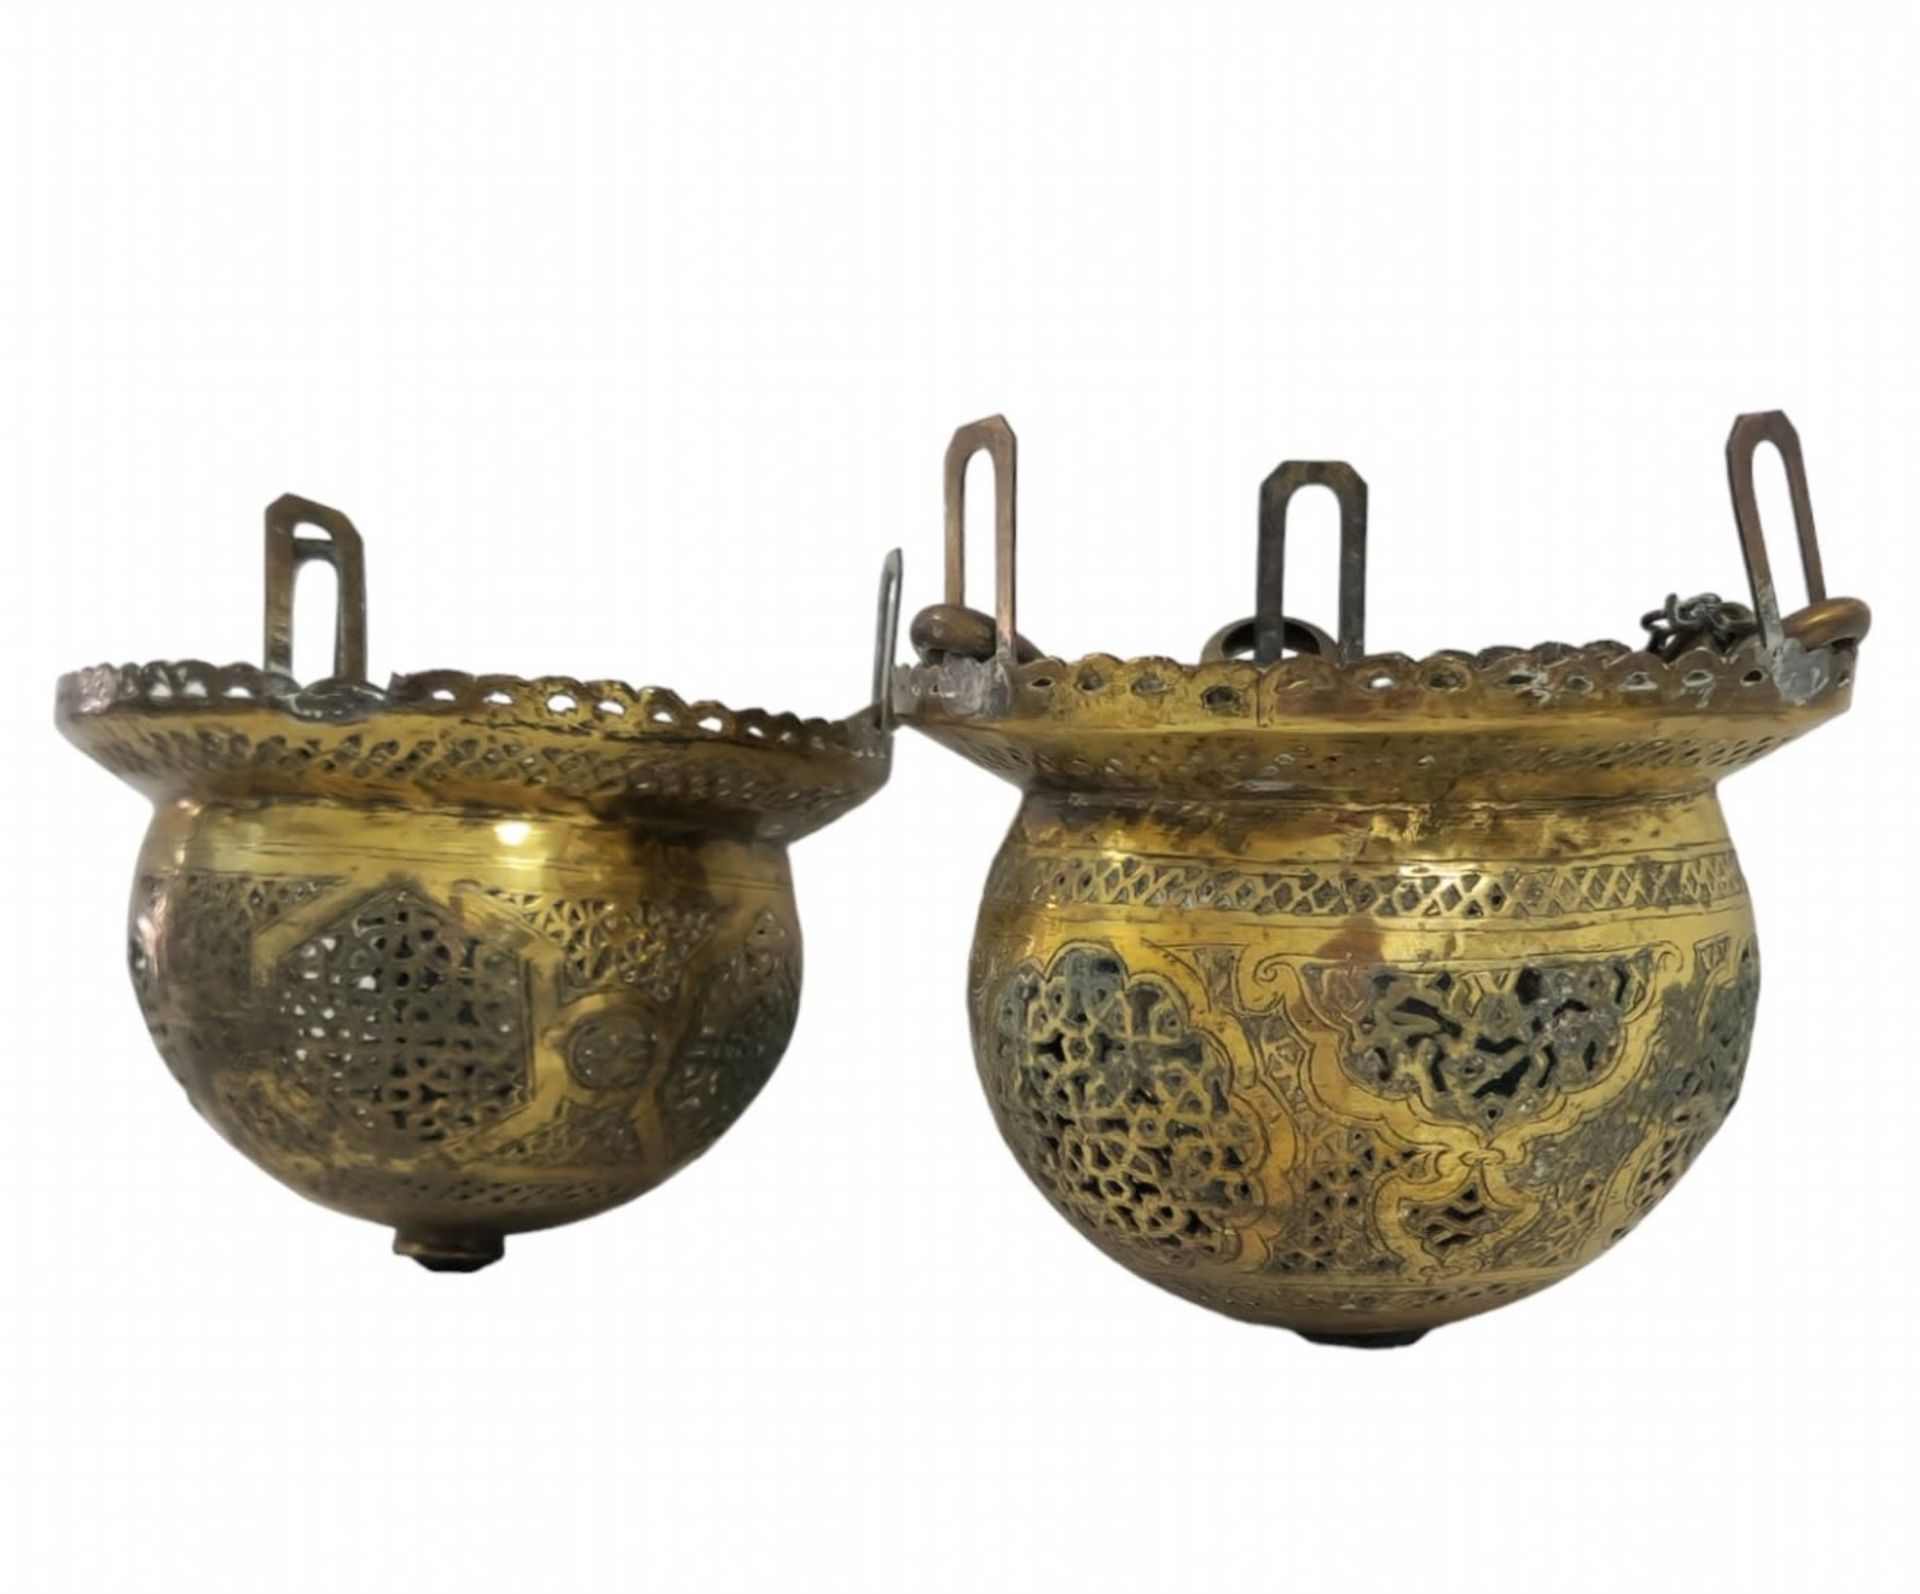 A pair of antique Islamic ceiling lamps, end of the 19th century, made of brass, decorated by hand - Image 2 of 5